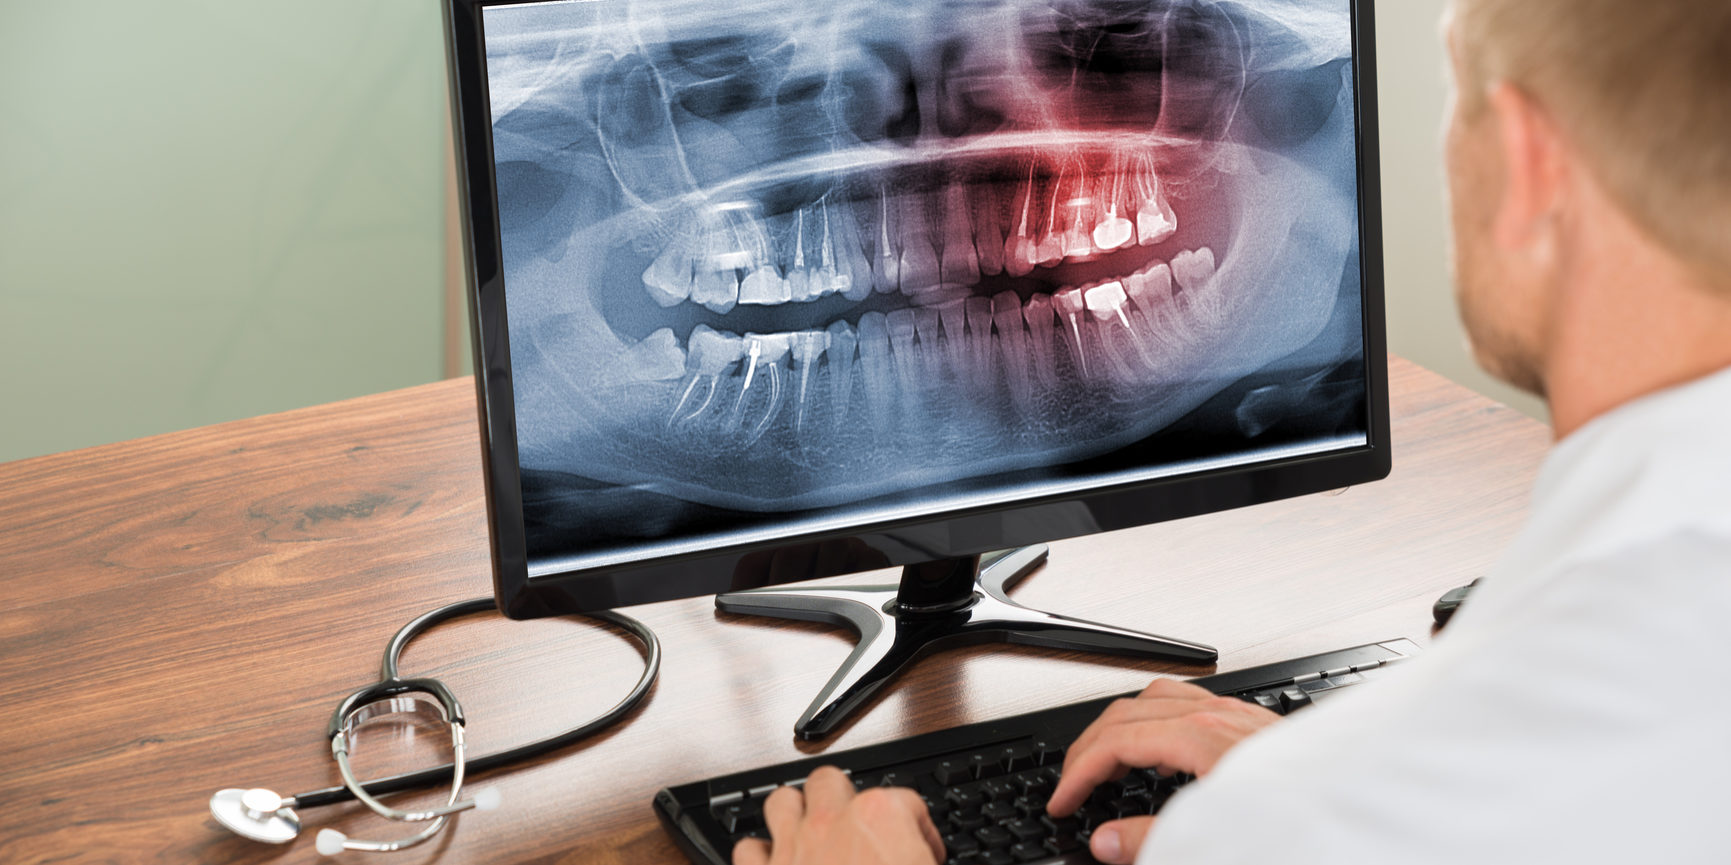 Close-up Of Male Doctor Looking At Teeth X-ray On Computer In Hospital